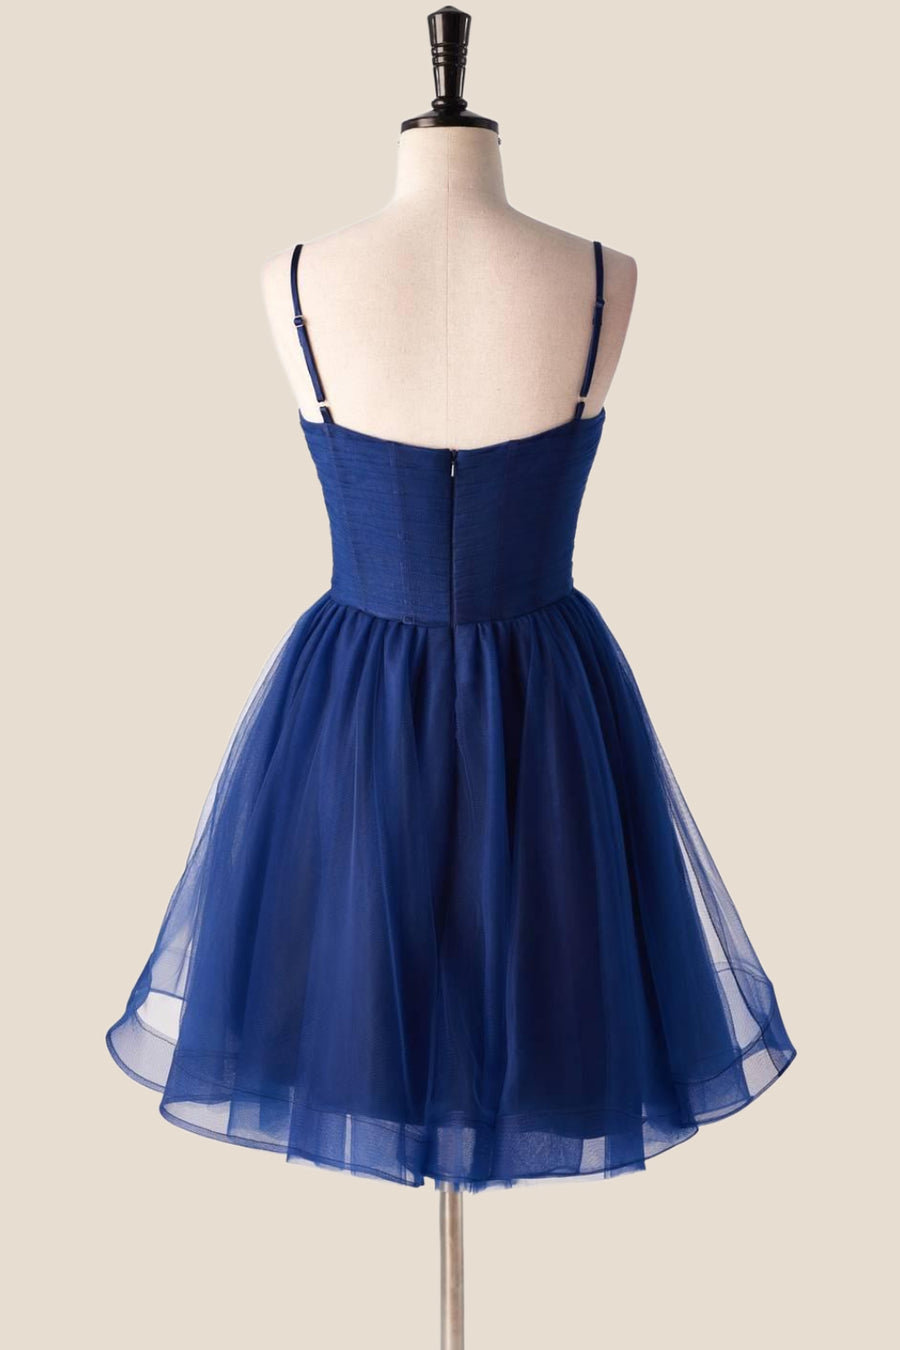 US 4 Pleated Navy Blue Tulle A-line Short Dress